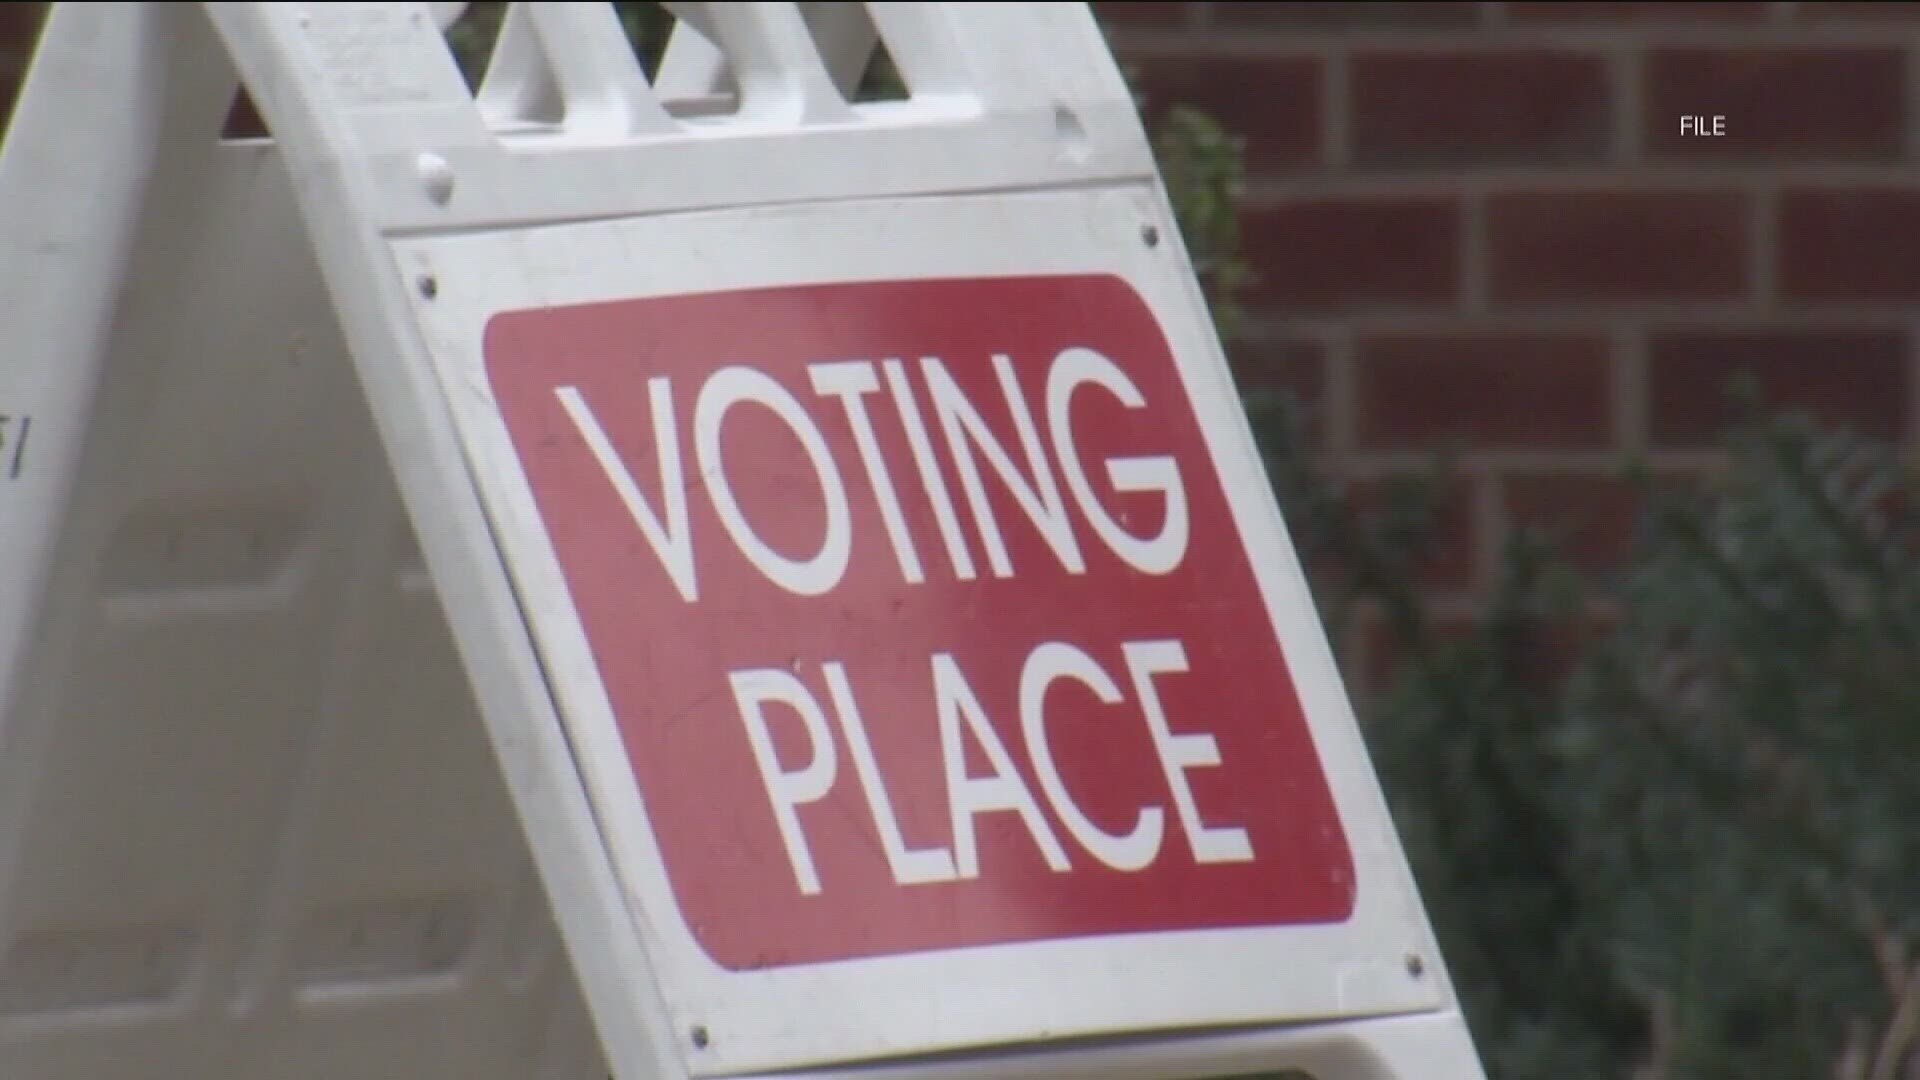 Here are the details on those candidates and more as voters will soon head to the polls to decide on races that impact their communities.